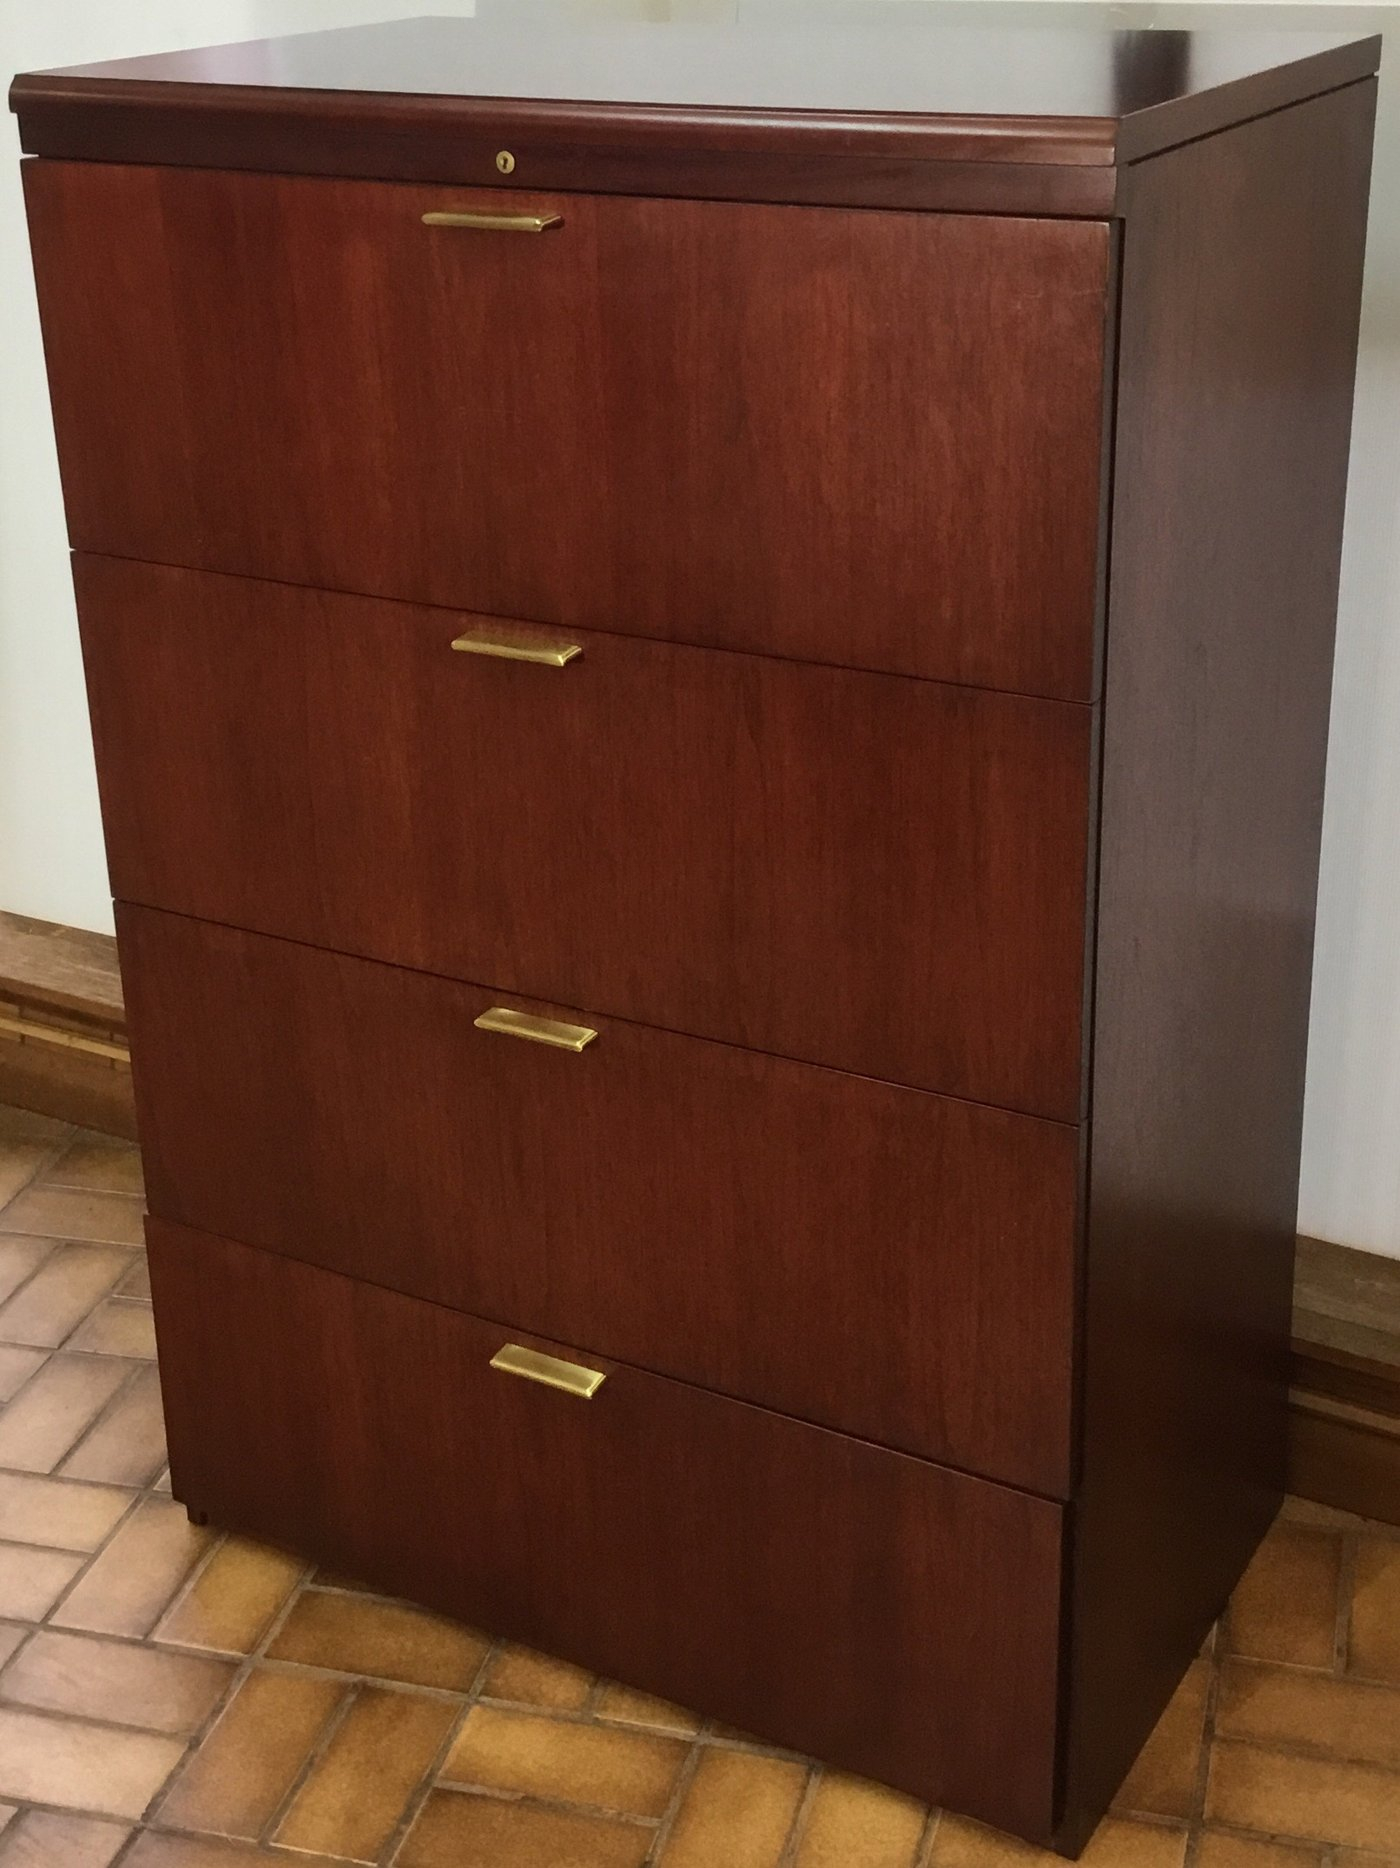 10 Mahogany Filing Cabinet 4 Drawer File Cabinets Chic Mahogany intended for sizing 1400 X 1868